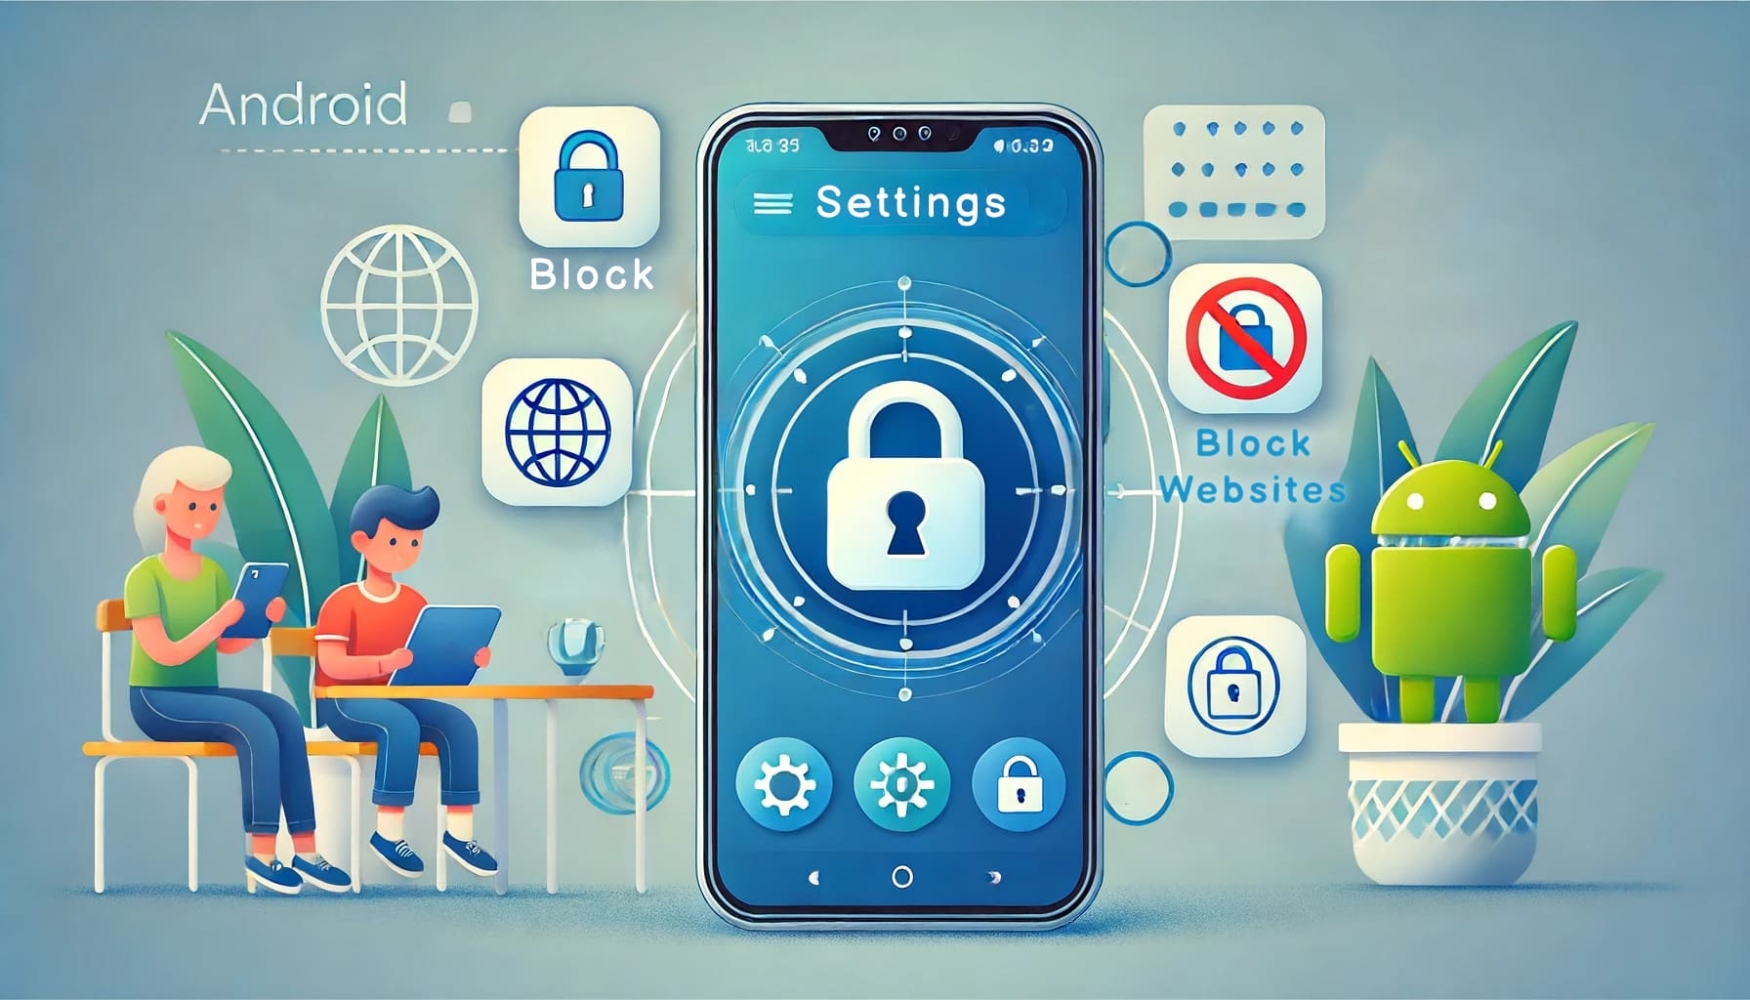 Illustration of an Android phone with a settings screen showing a padlock icon, surrounded by icons for blocking websites, and two people using devices